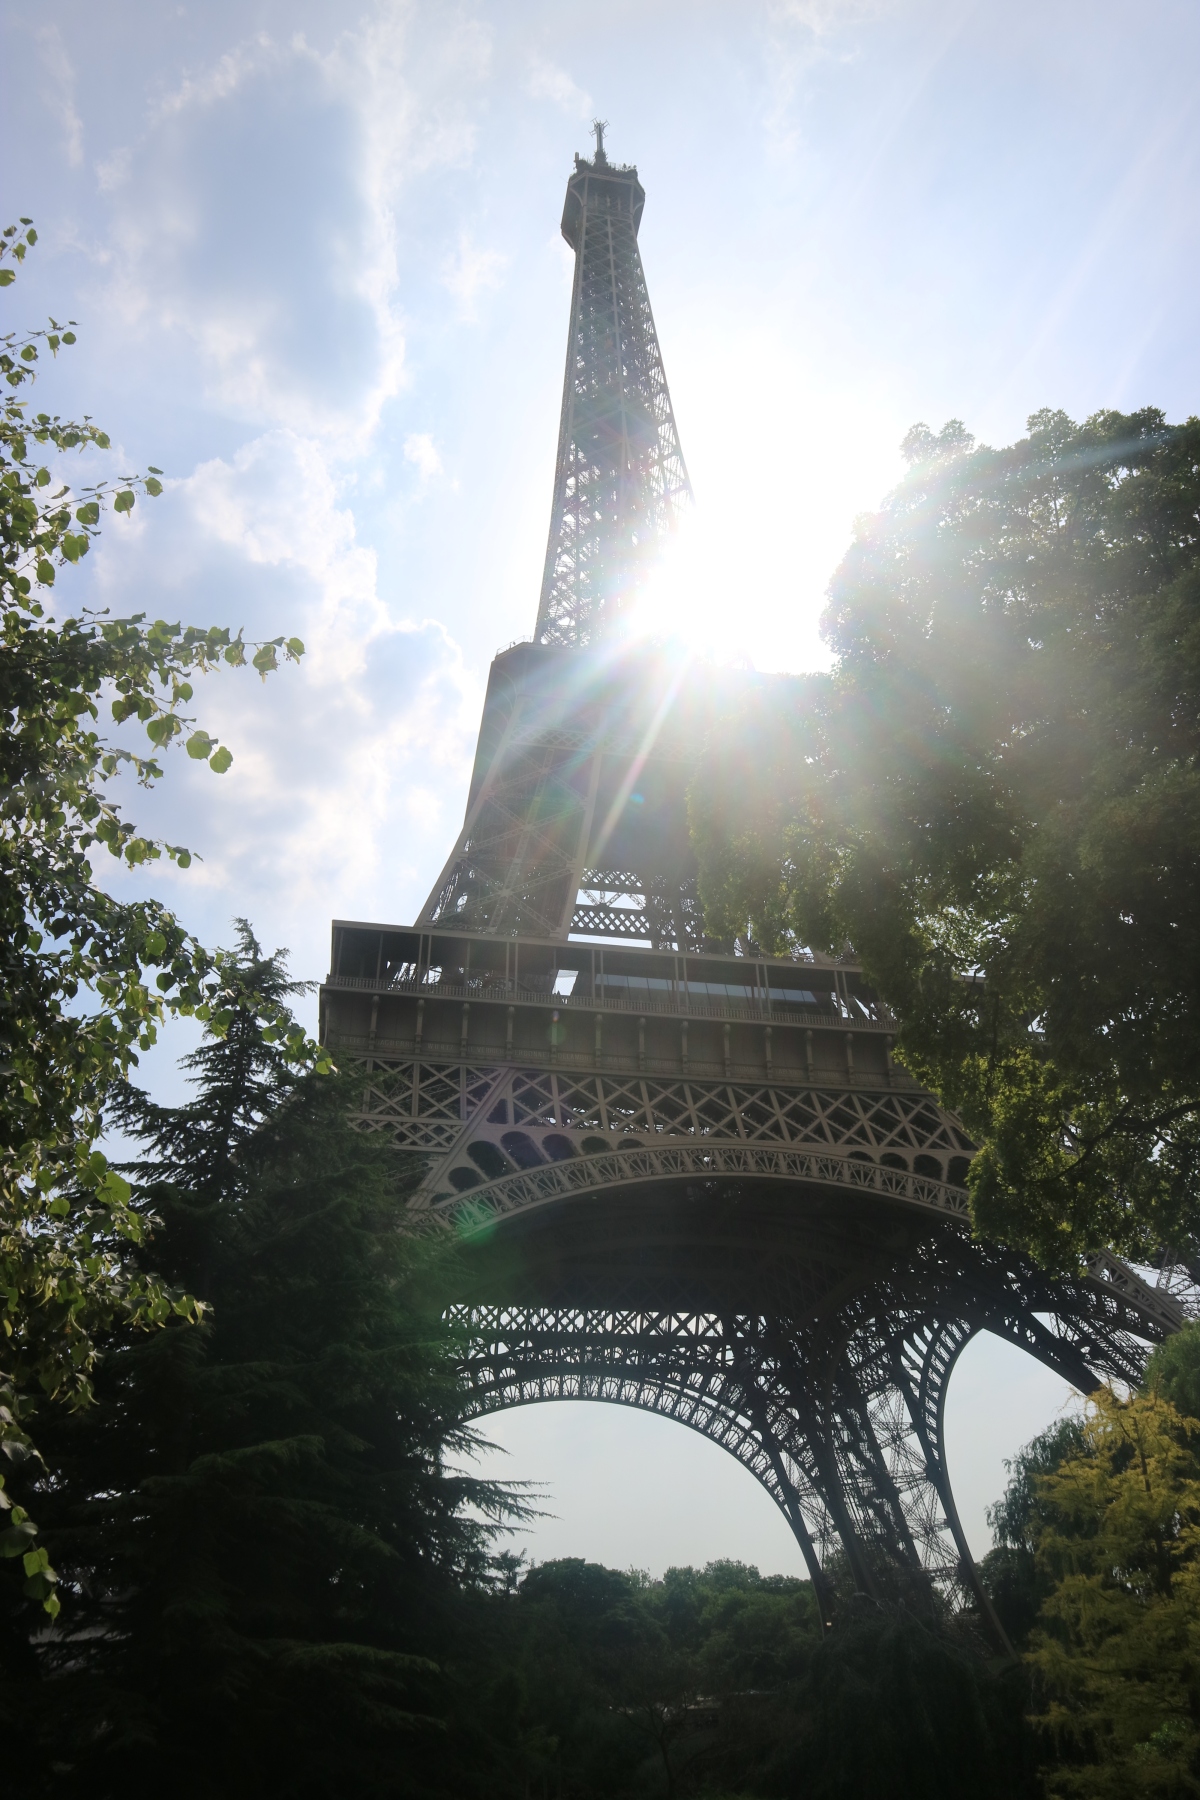 Photo Diary: Day 2 in Paris